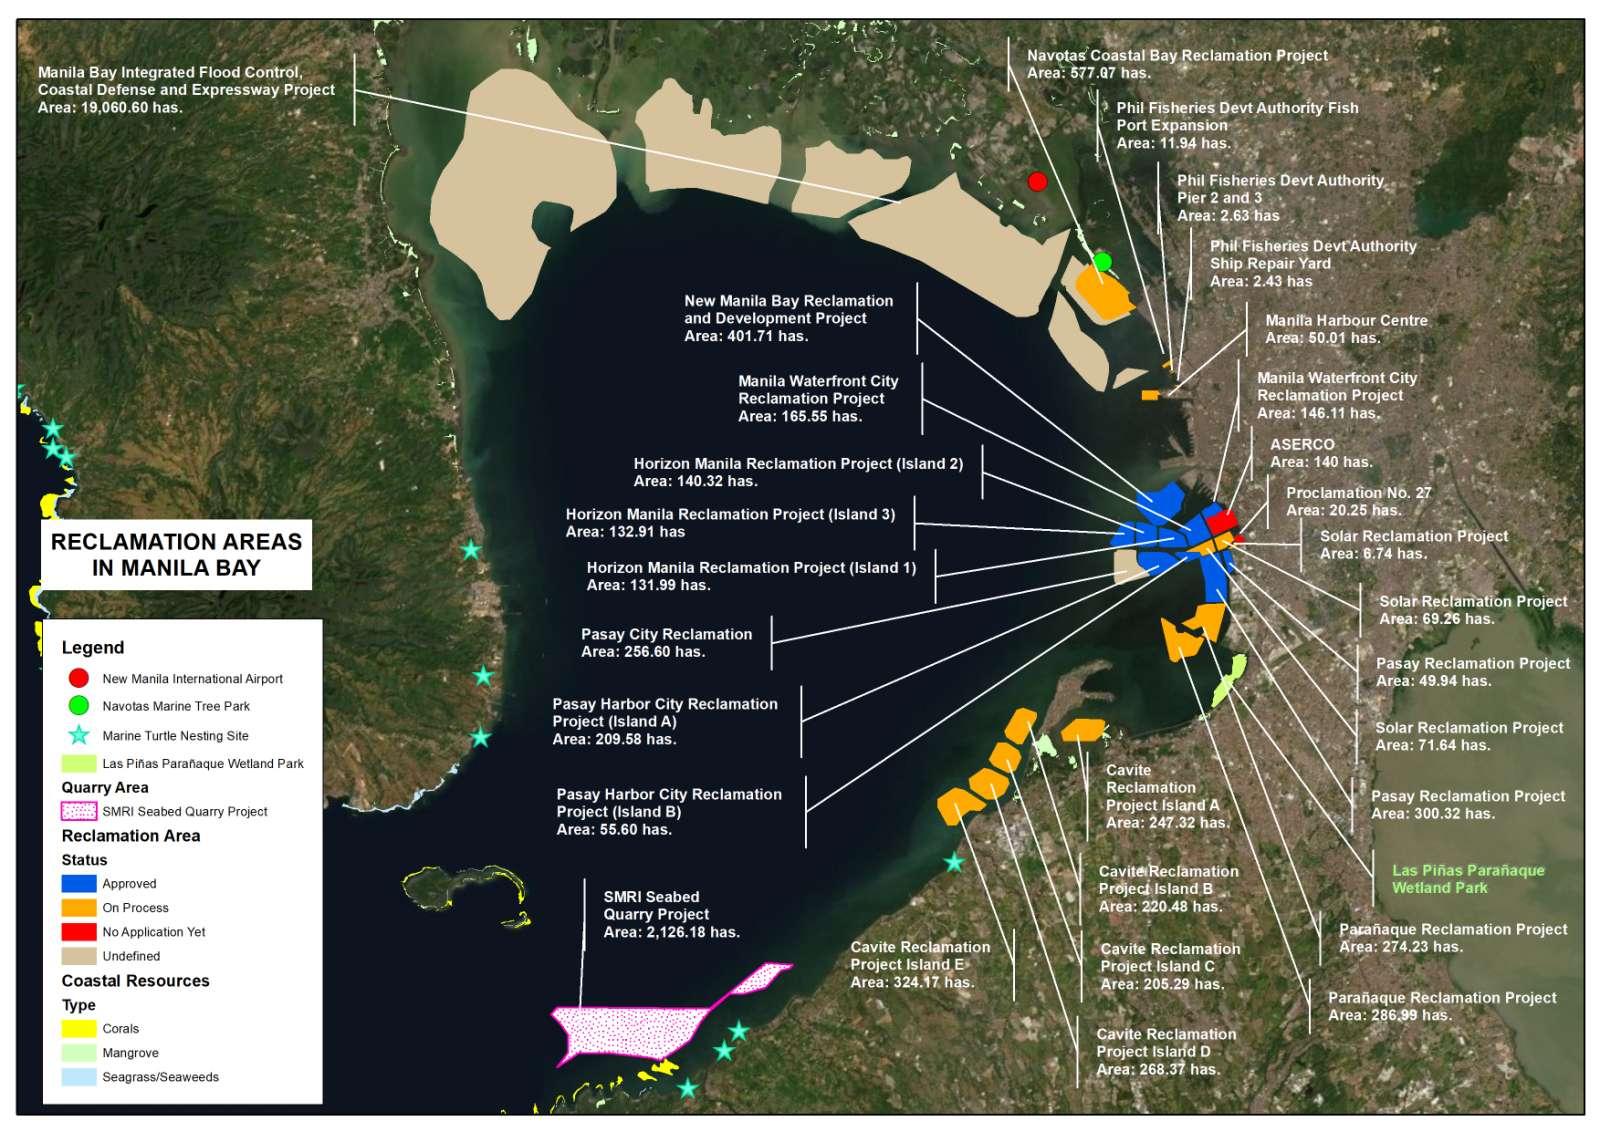 Maps show extent of Manila Bay reclamation projects GMA News Online